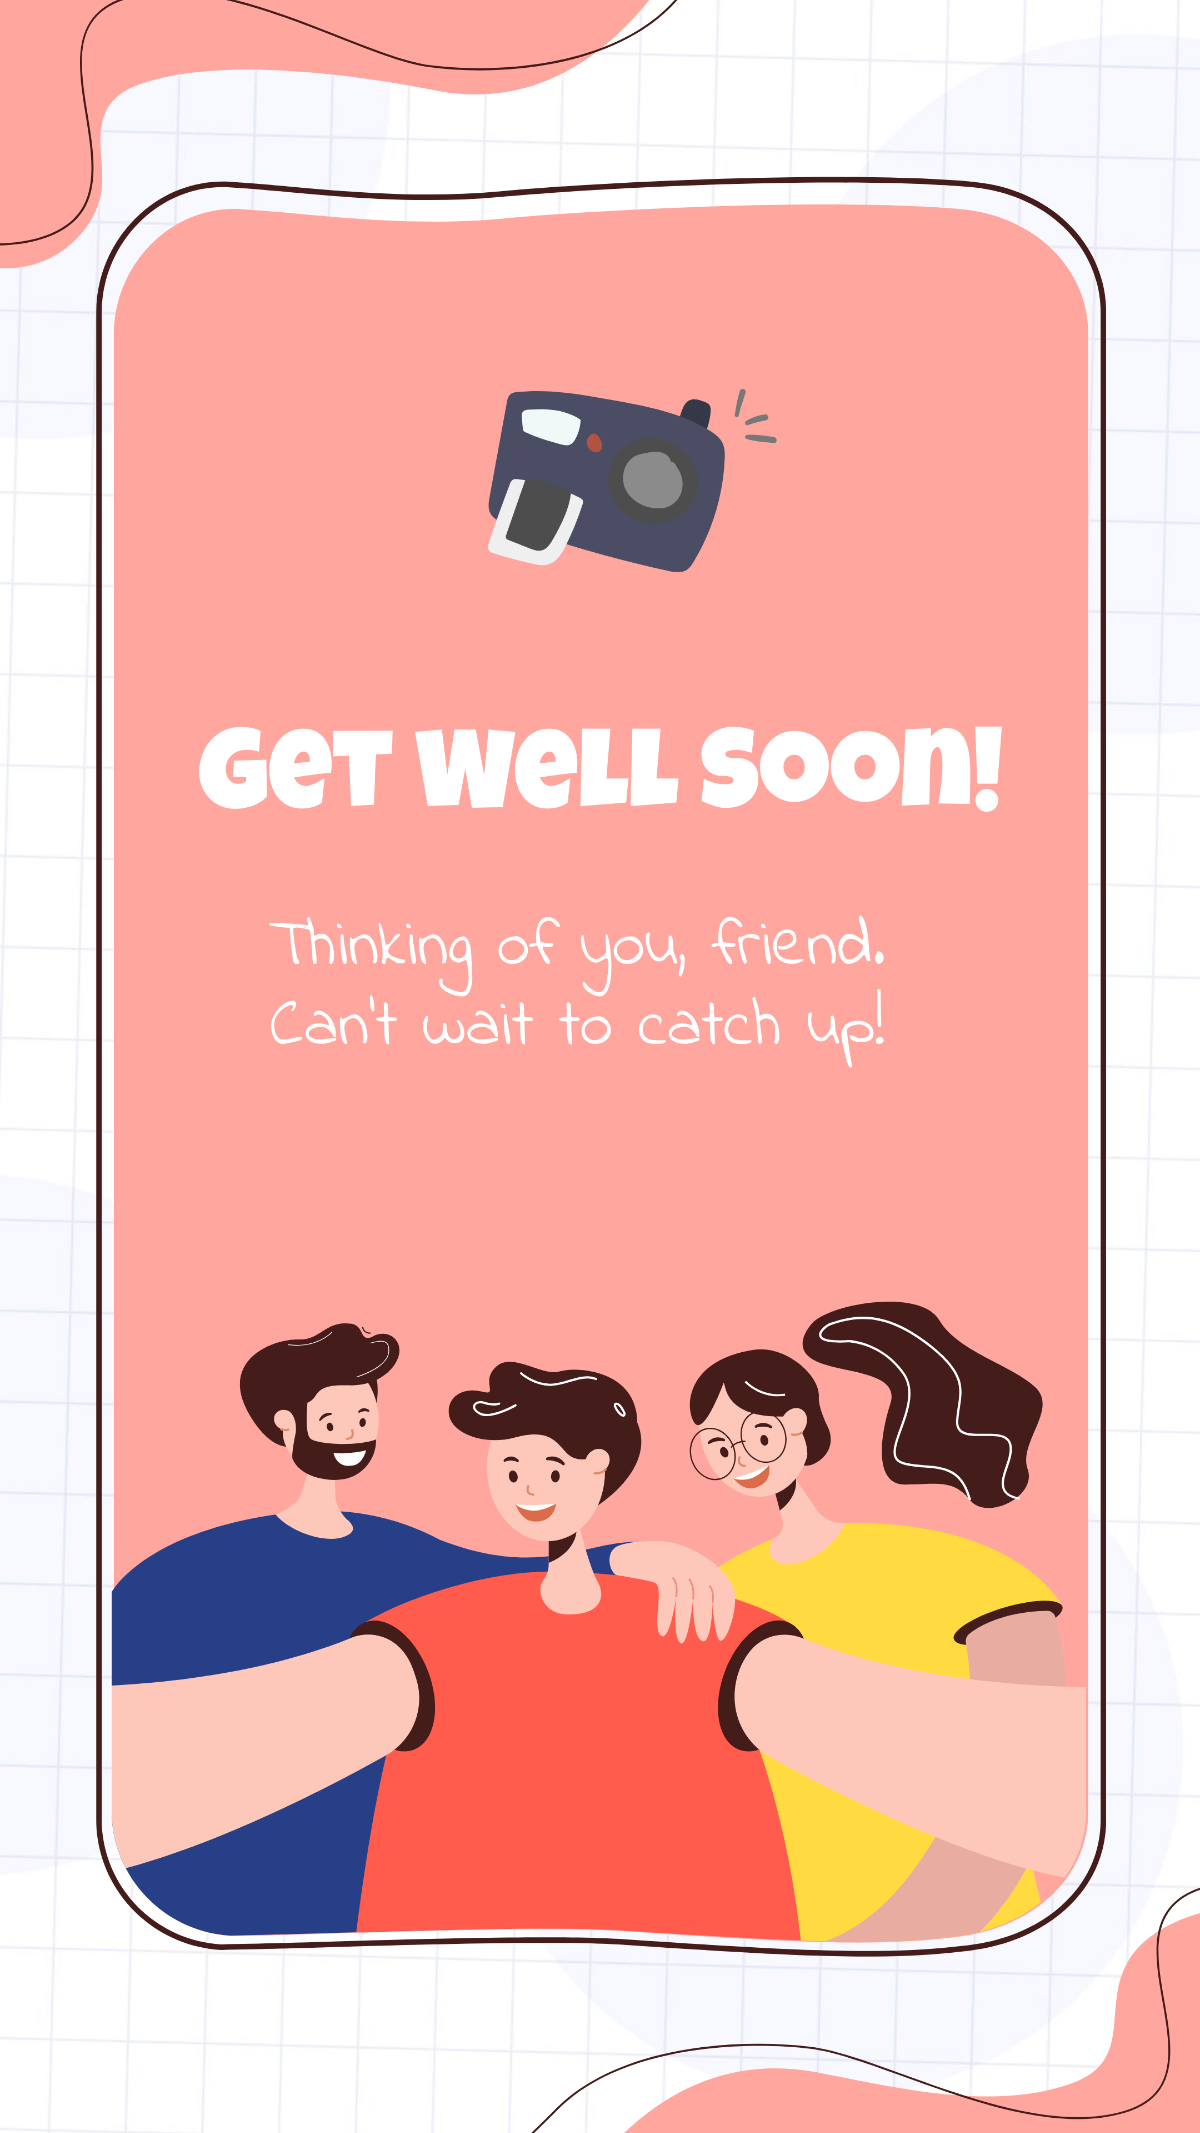 Get Well Soon Letter To Friend